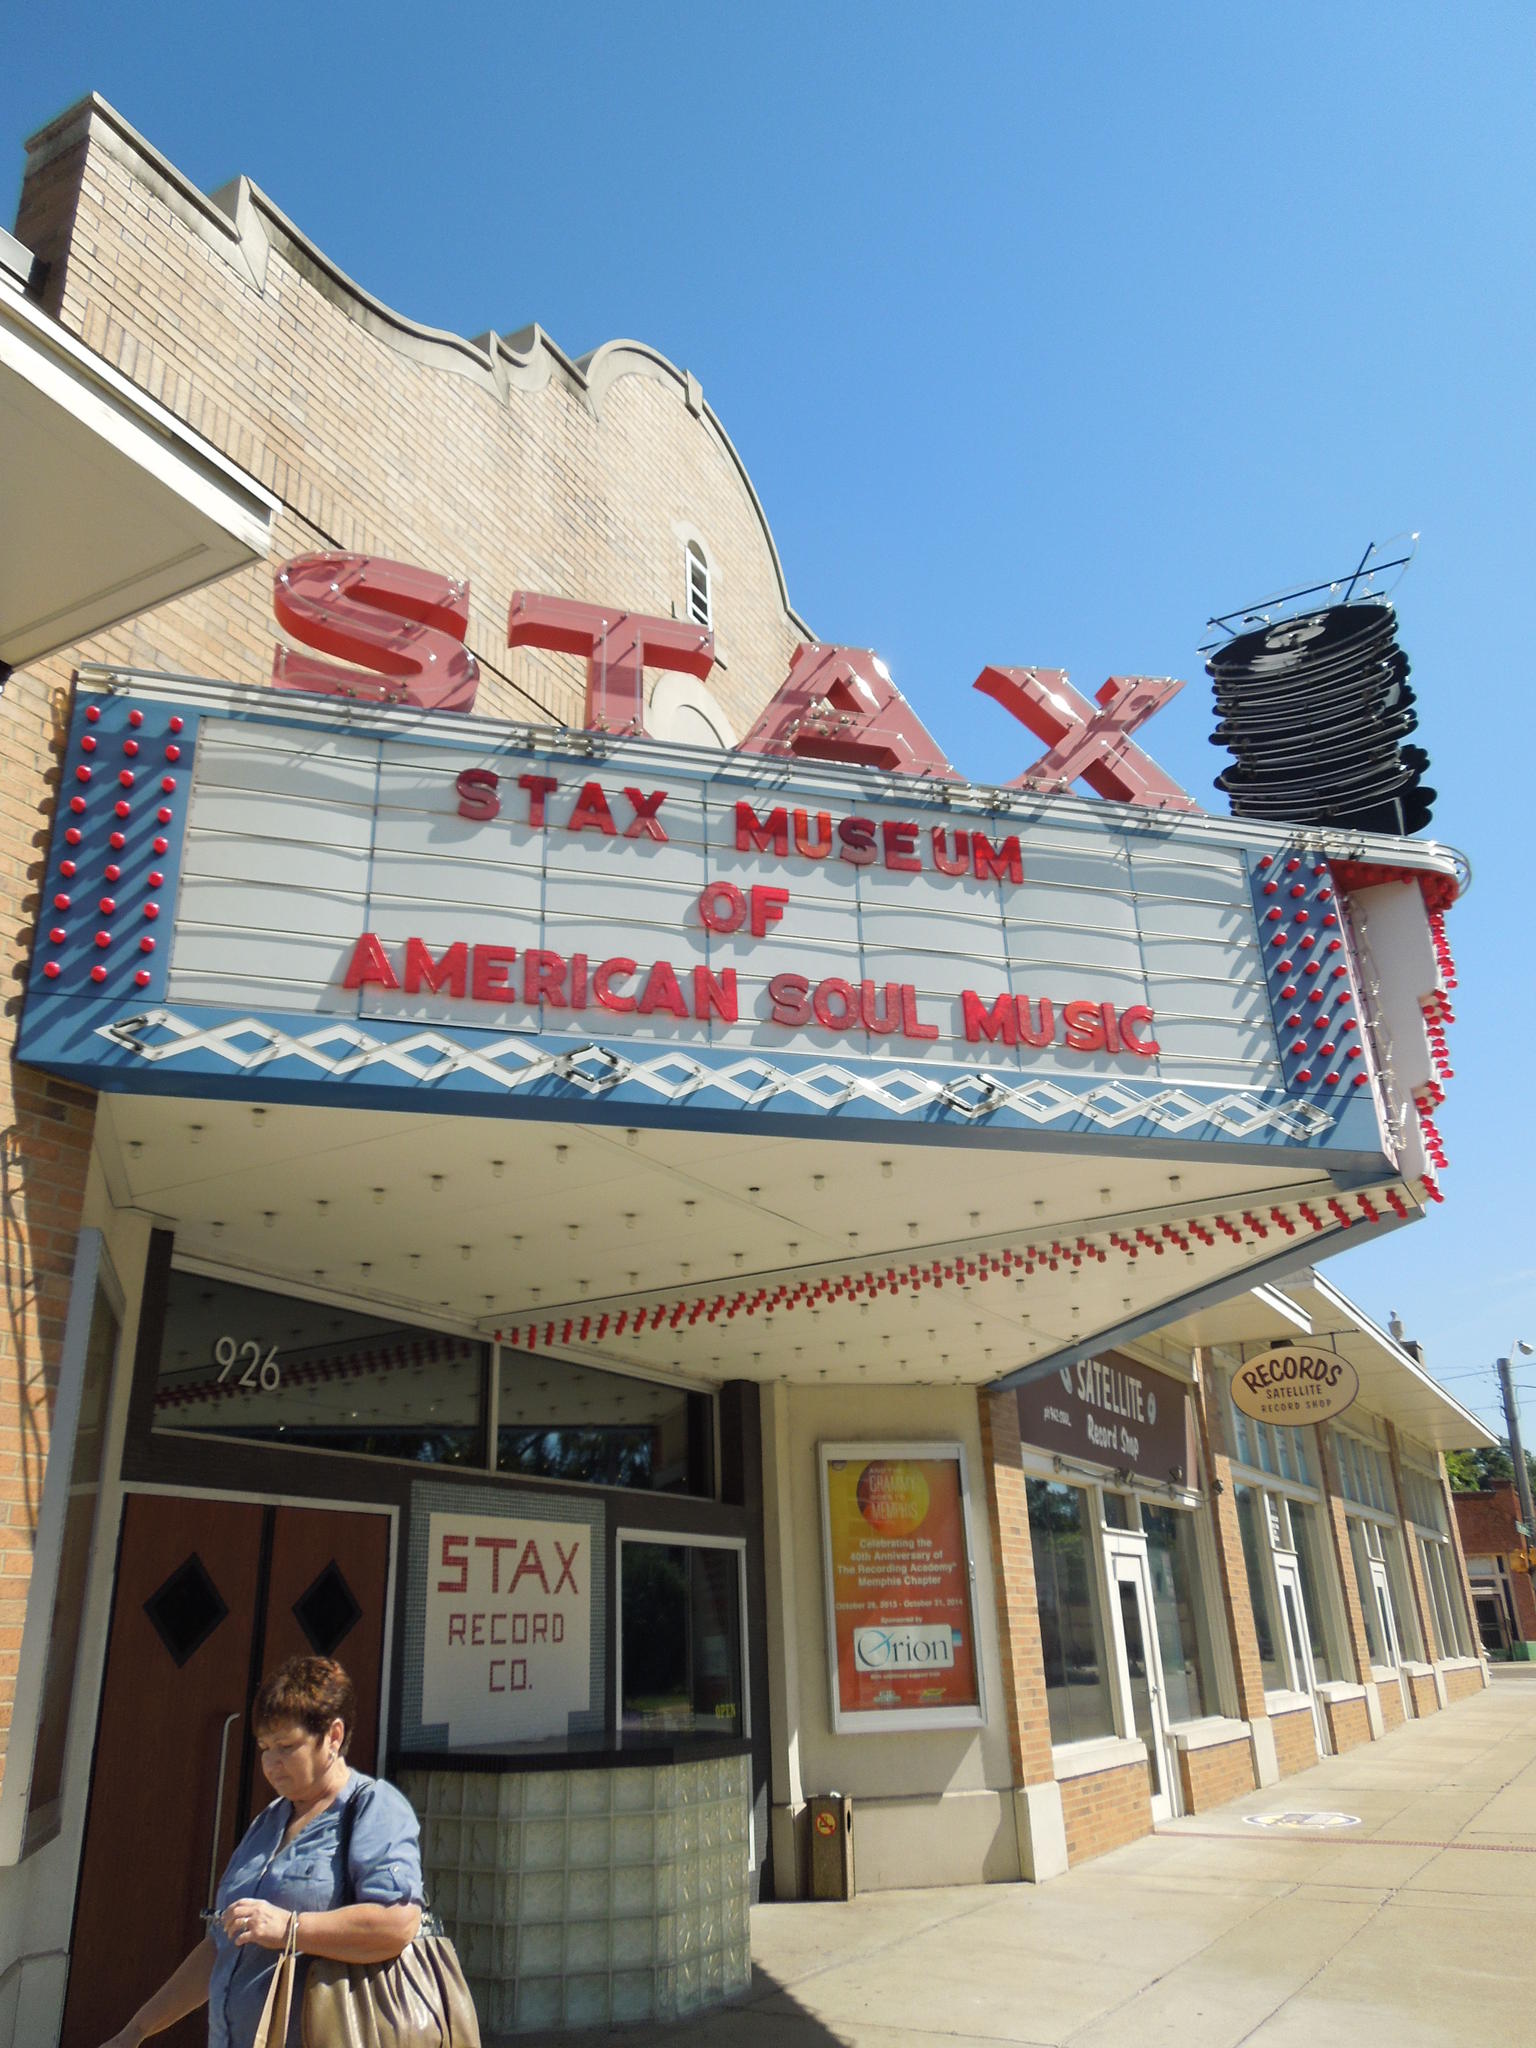 The Stax Museum of Soul Music